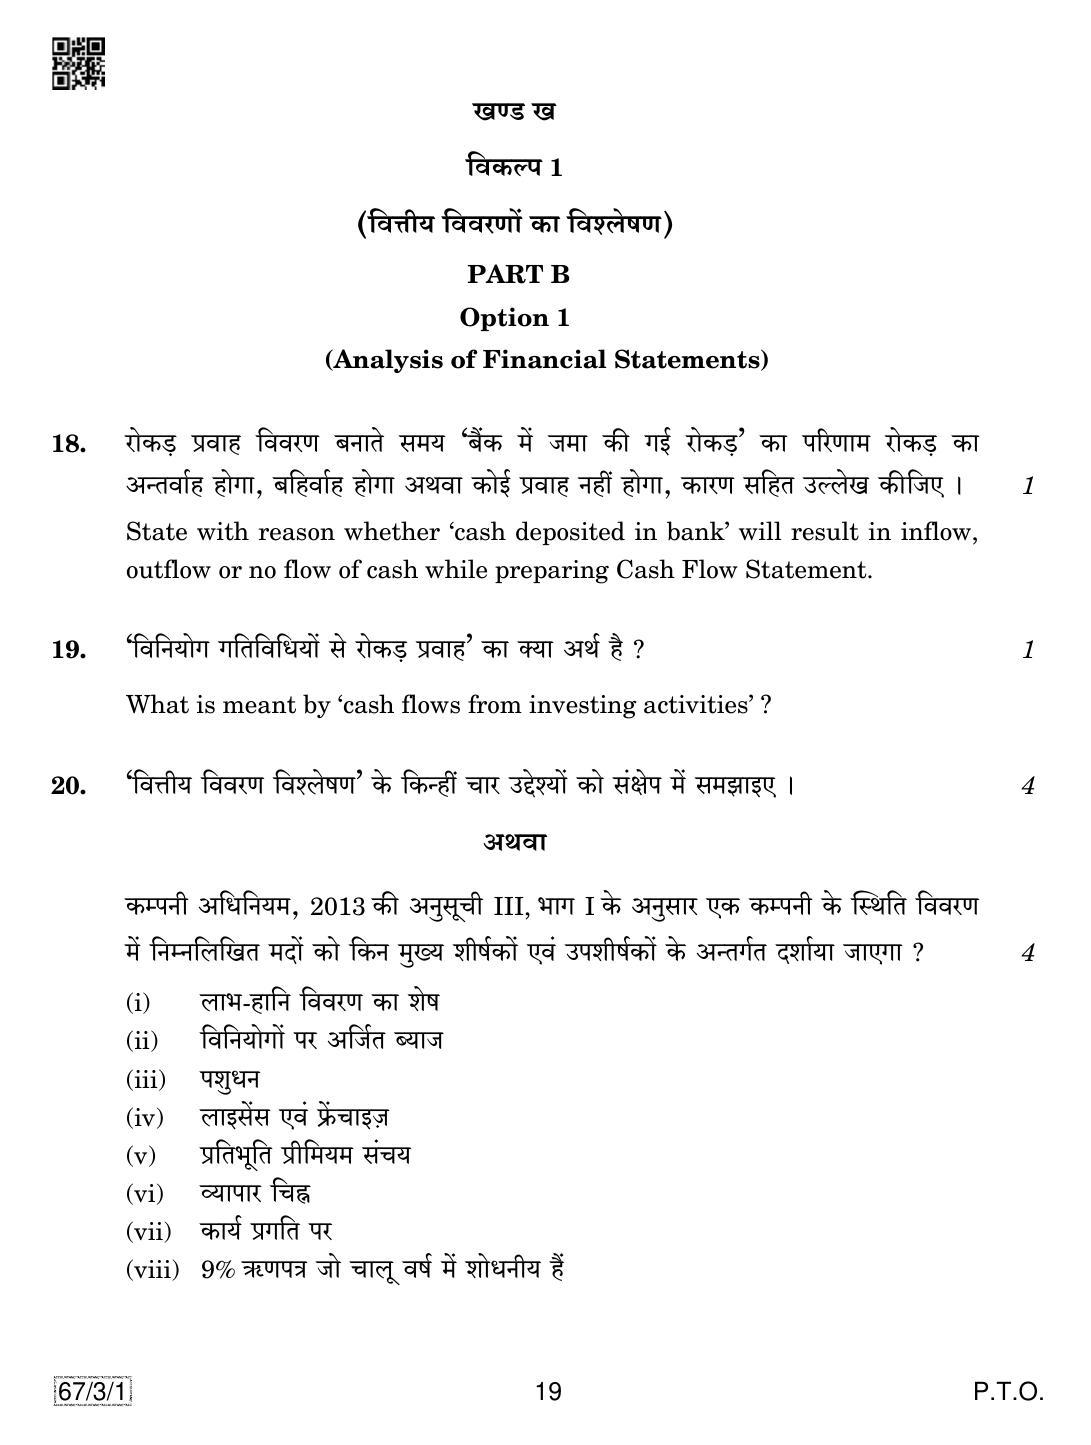 CBSE Class 12 67-3-1 Accountancy 2019 Question Paper - Page 19